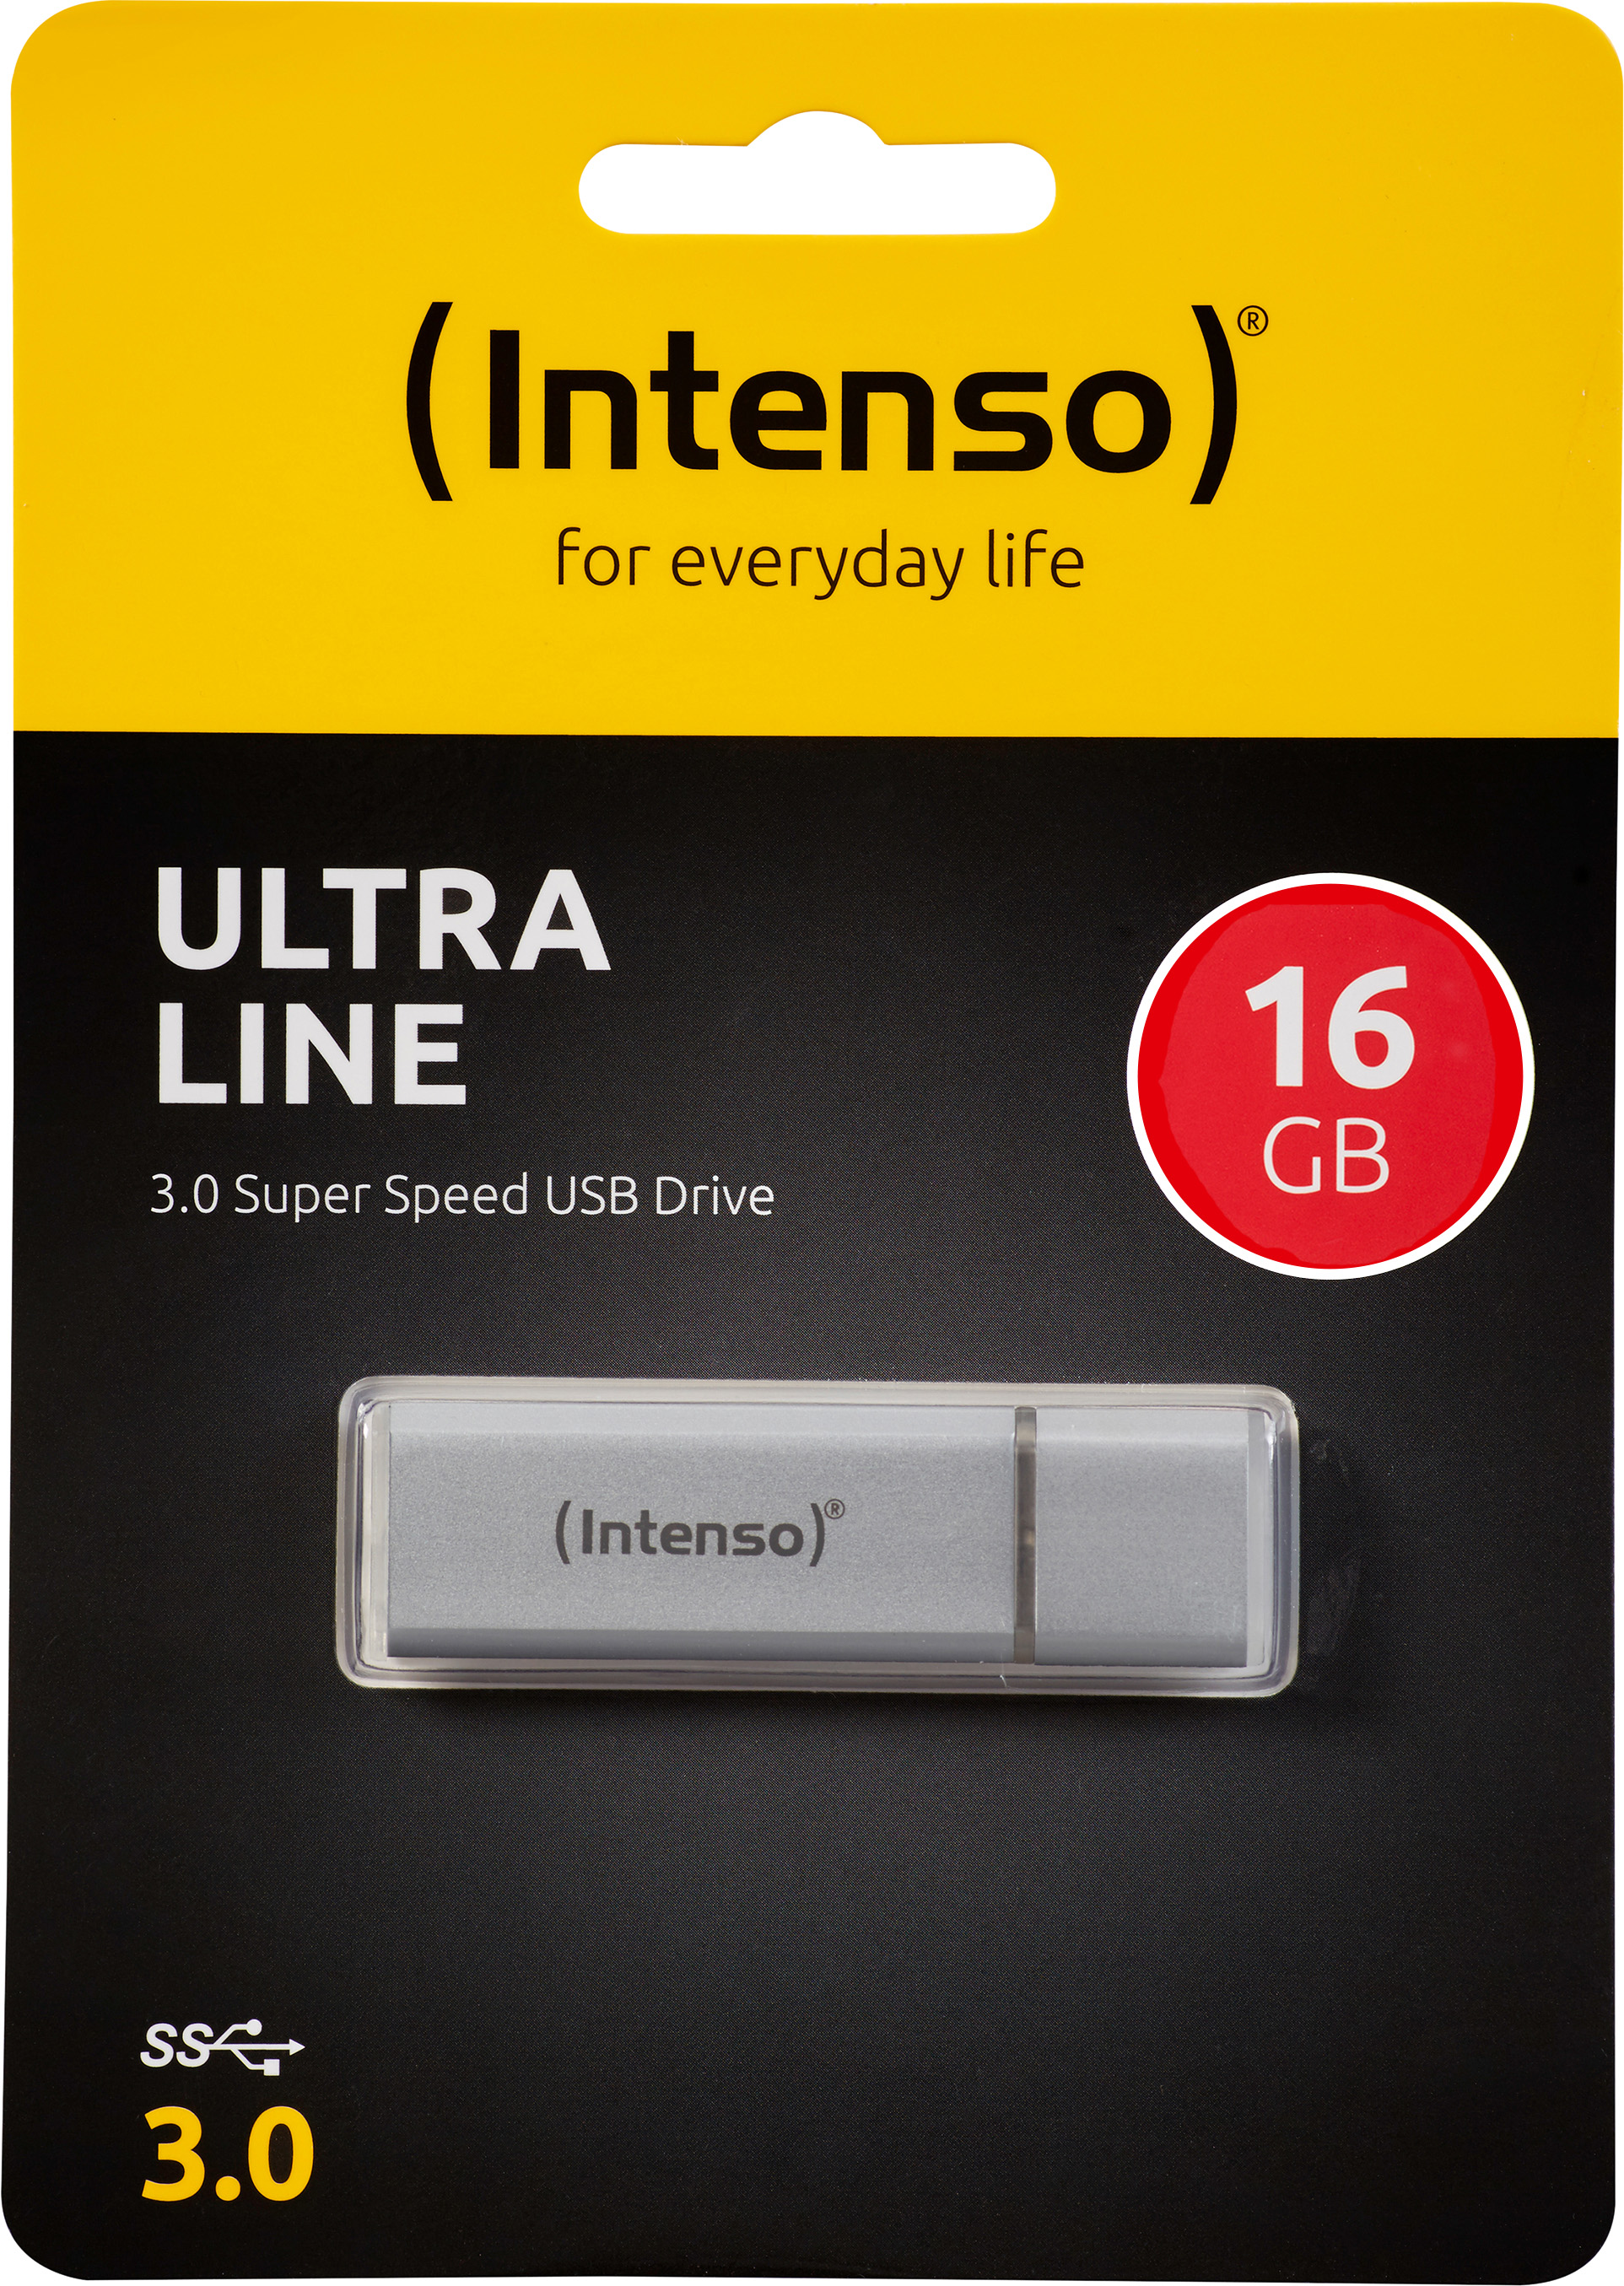 Intenso USB 3.0 Stick 16GB, Ultra Line, silber Typ-A, (R) 70MB/s, Retail-Blister